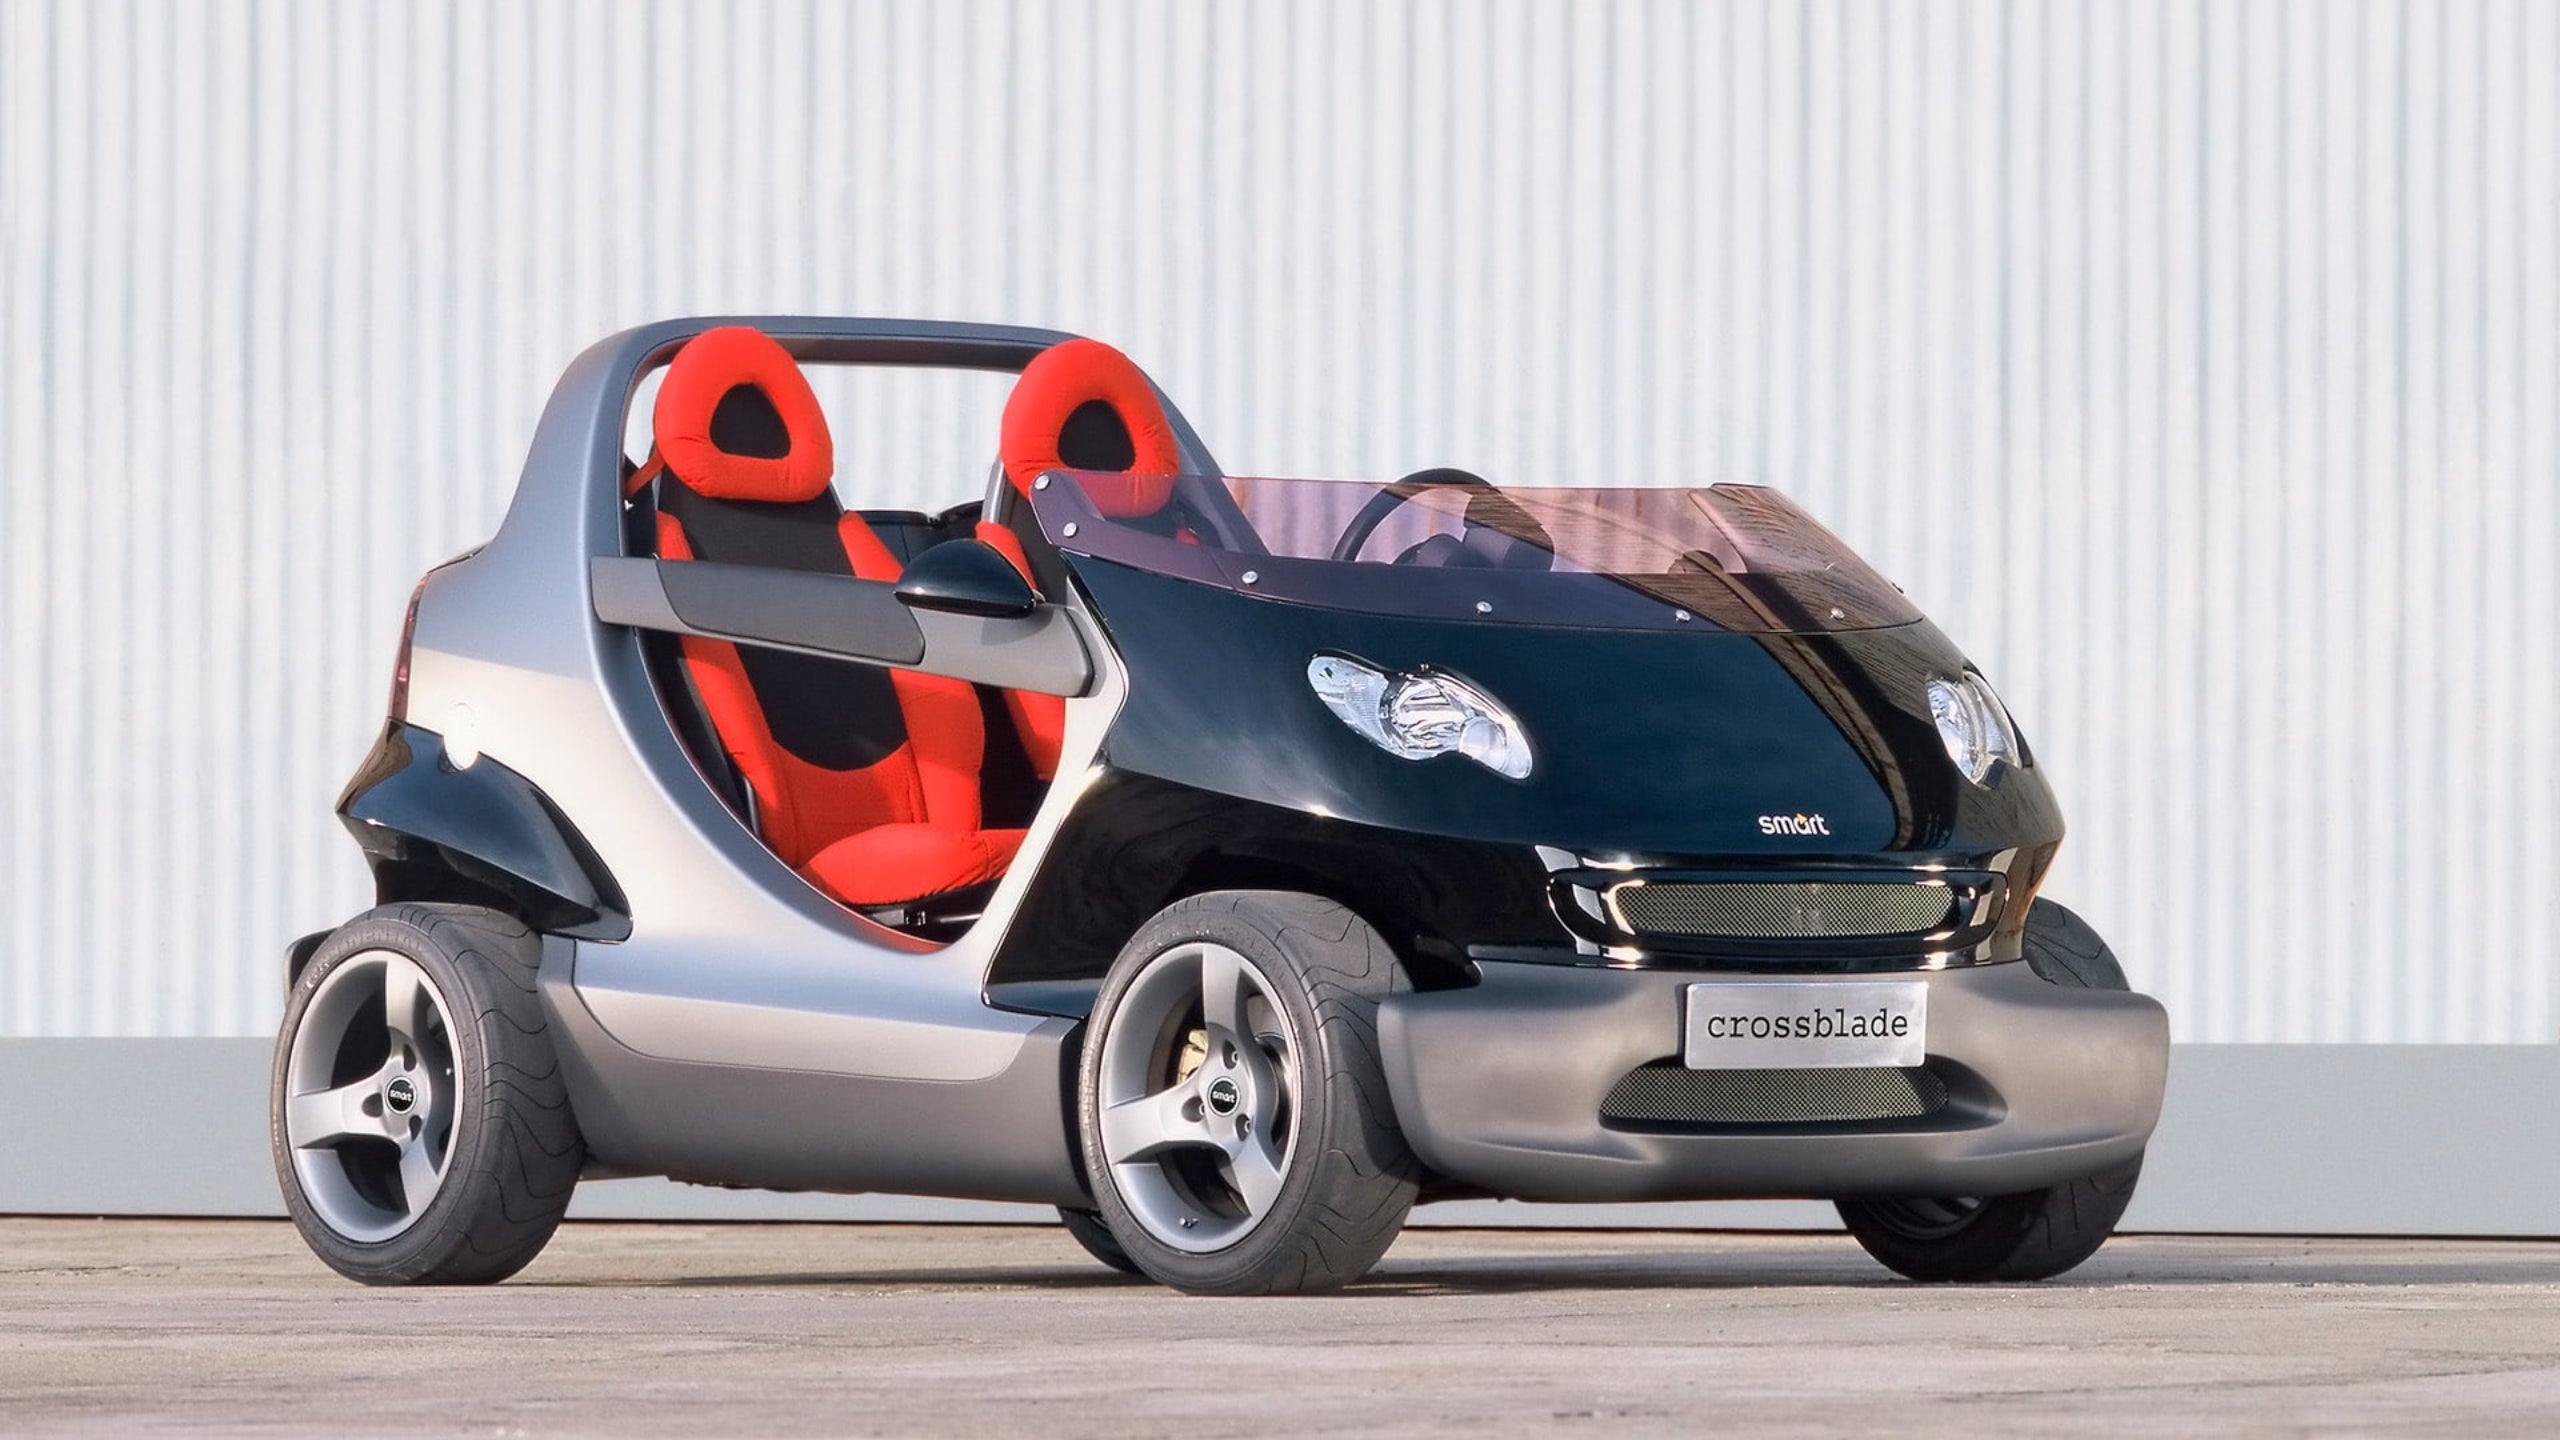 The Smart Crossblade Is a Quirky, Rare, Road-Legal Concept Car